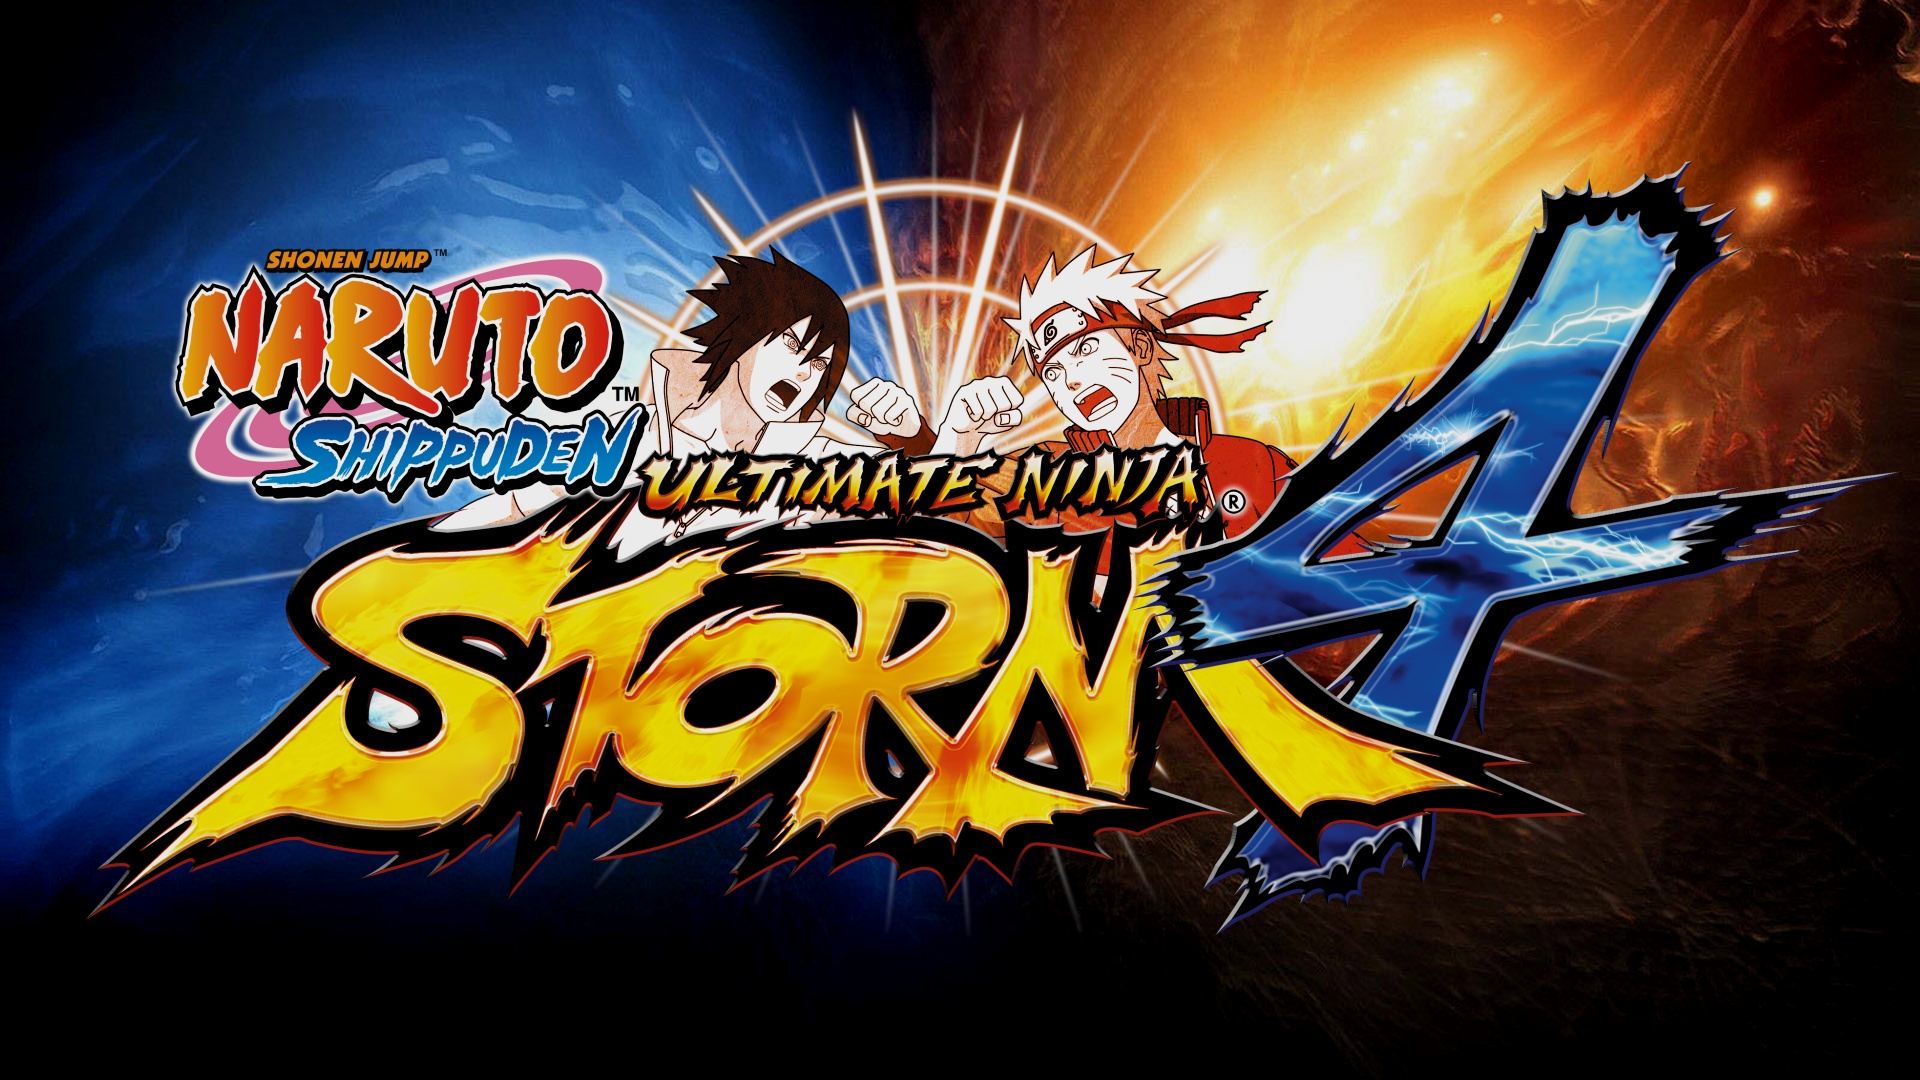 how long is naruto storm 4